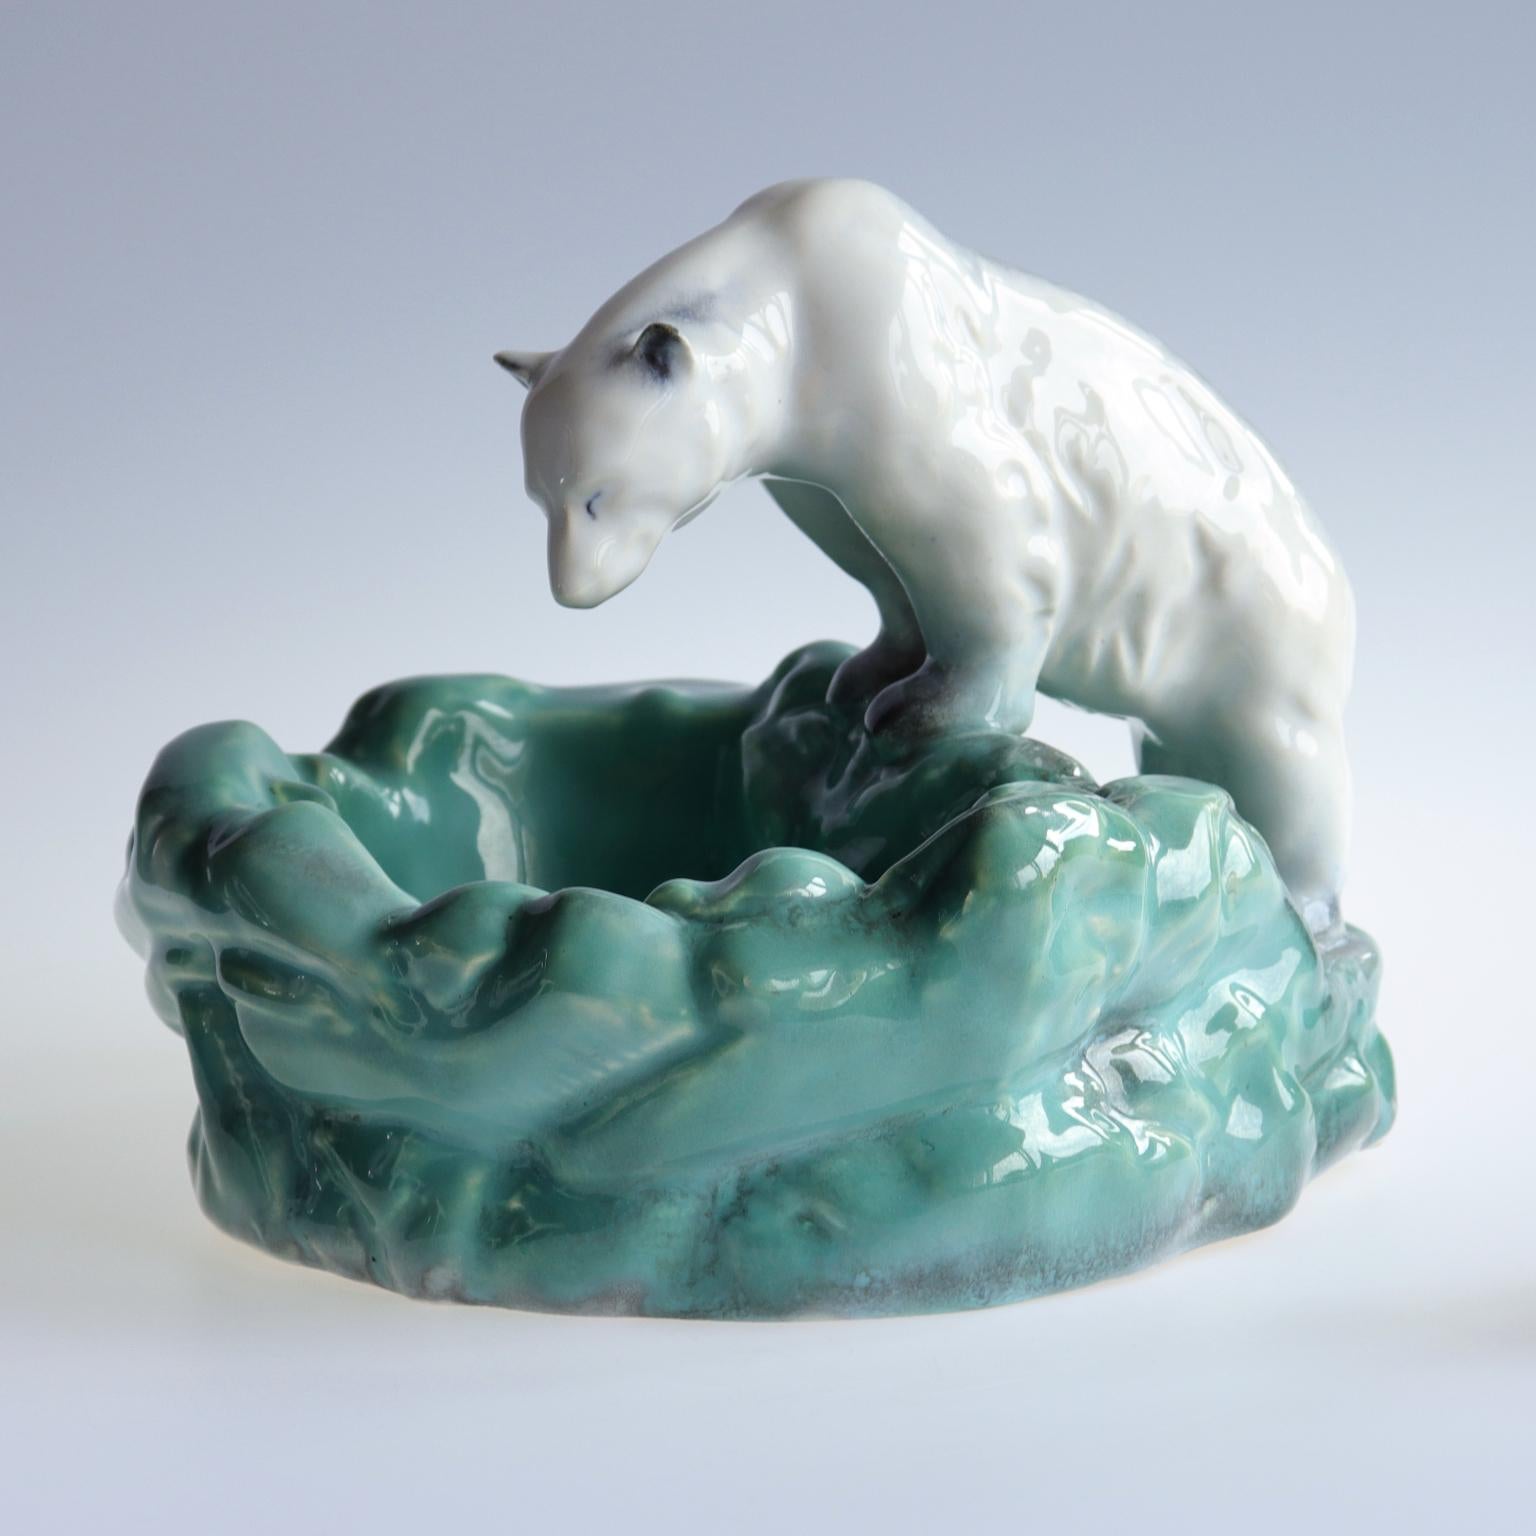 Polar bear at ice POOL, a ceramic bowl manufactured by Ditmar Urbach in Czechoslovakia in the 1930s. The bowl was designed to celebrate Nora, the first polar bear in the Prague Zoo. The piece is marked, Ditmar Urbach made in Czechoslovakia it is in